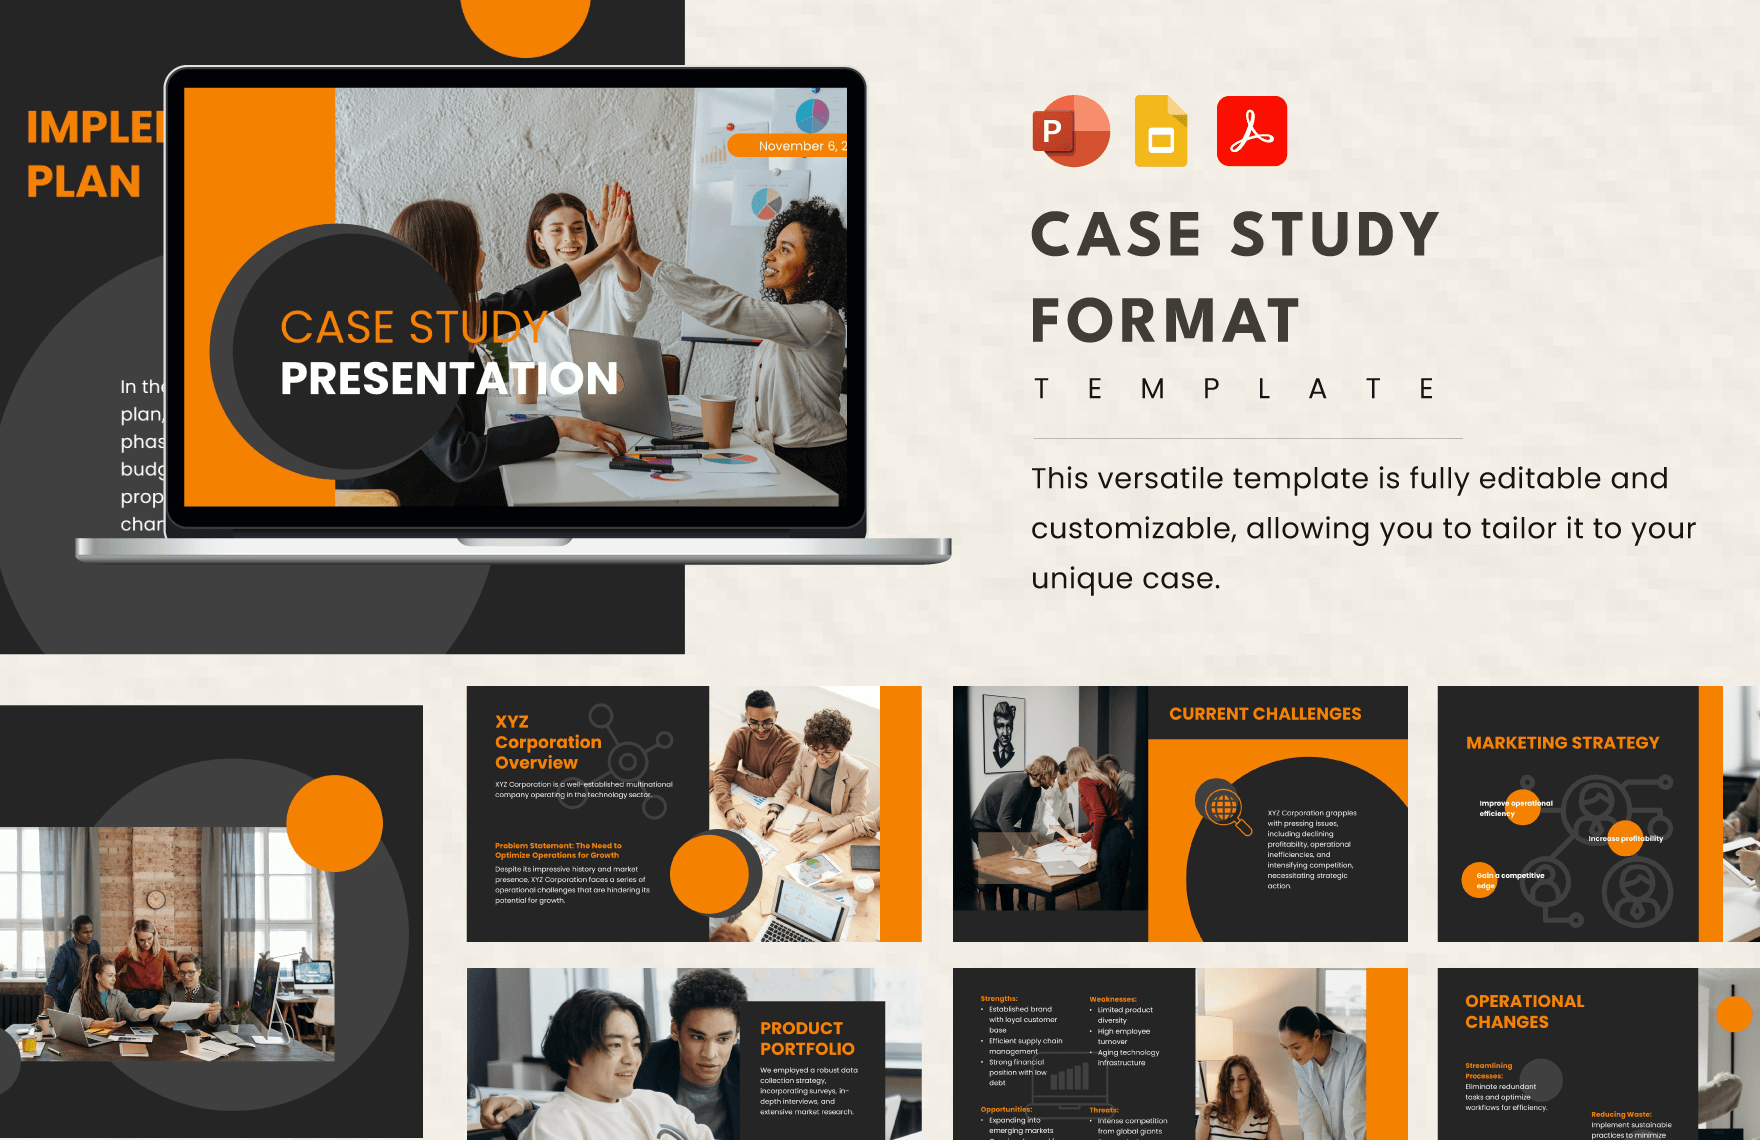 Case Study Format Template